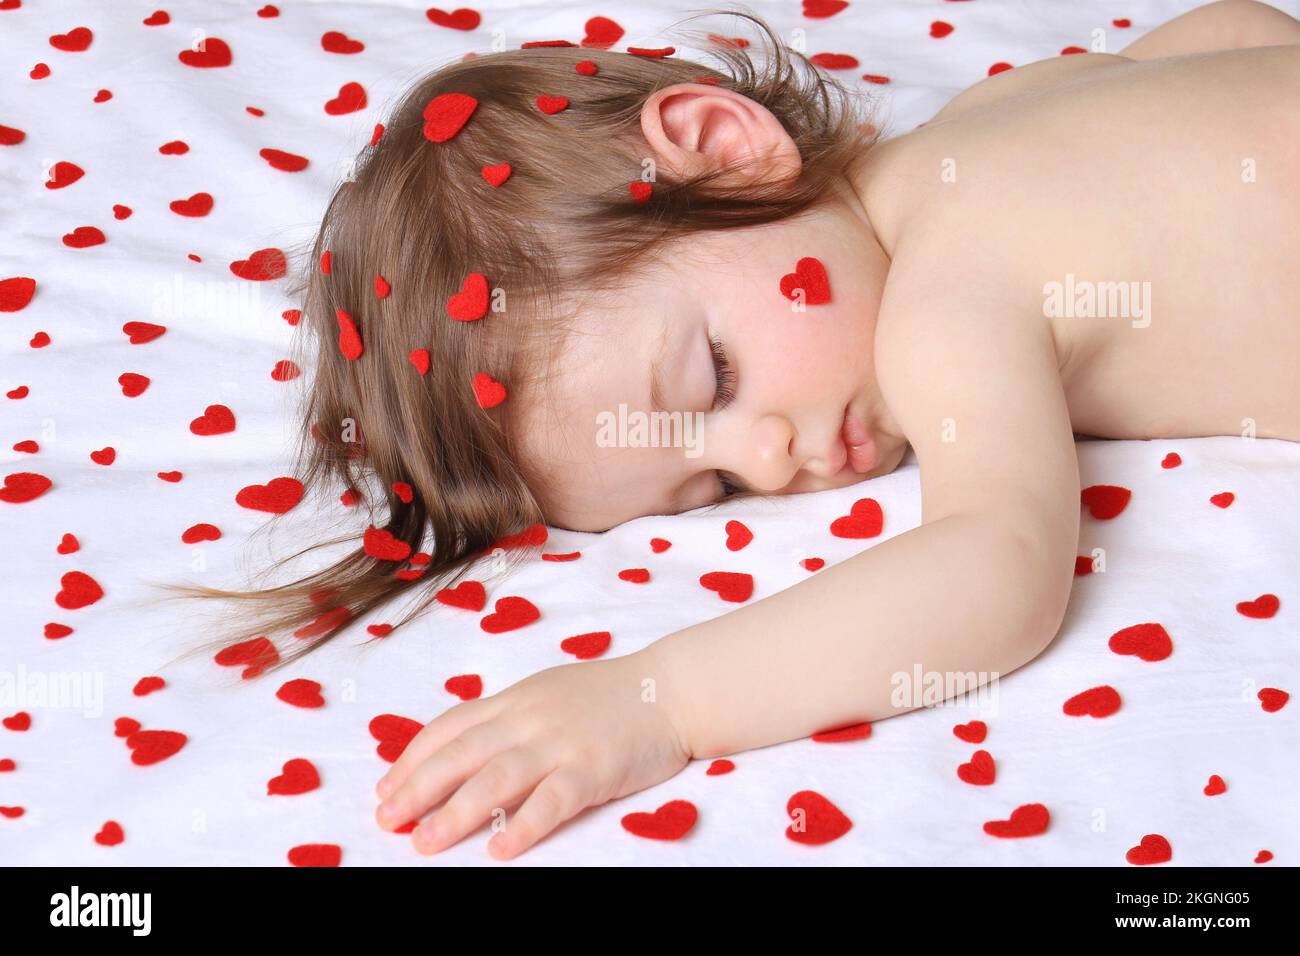 An infant sleeping with lots of red hearts surrounding him on white. Stock Photo